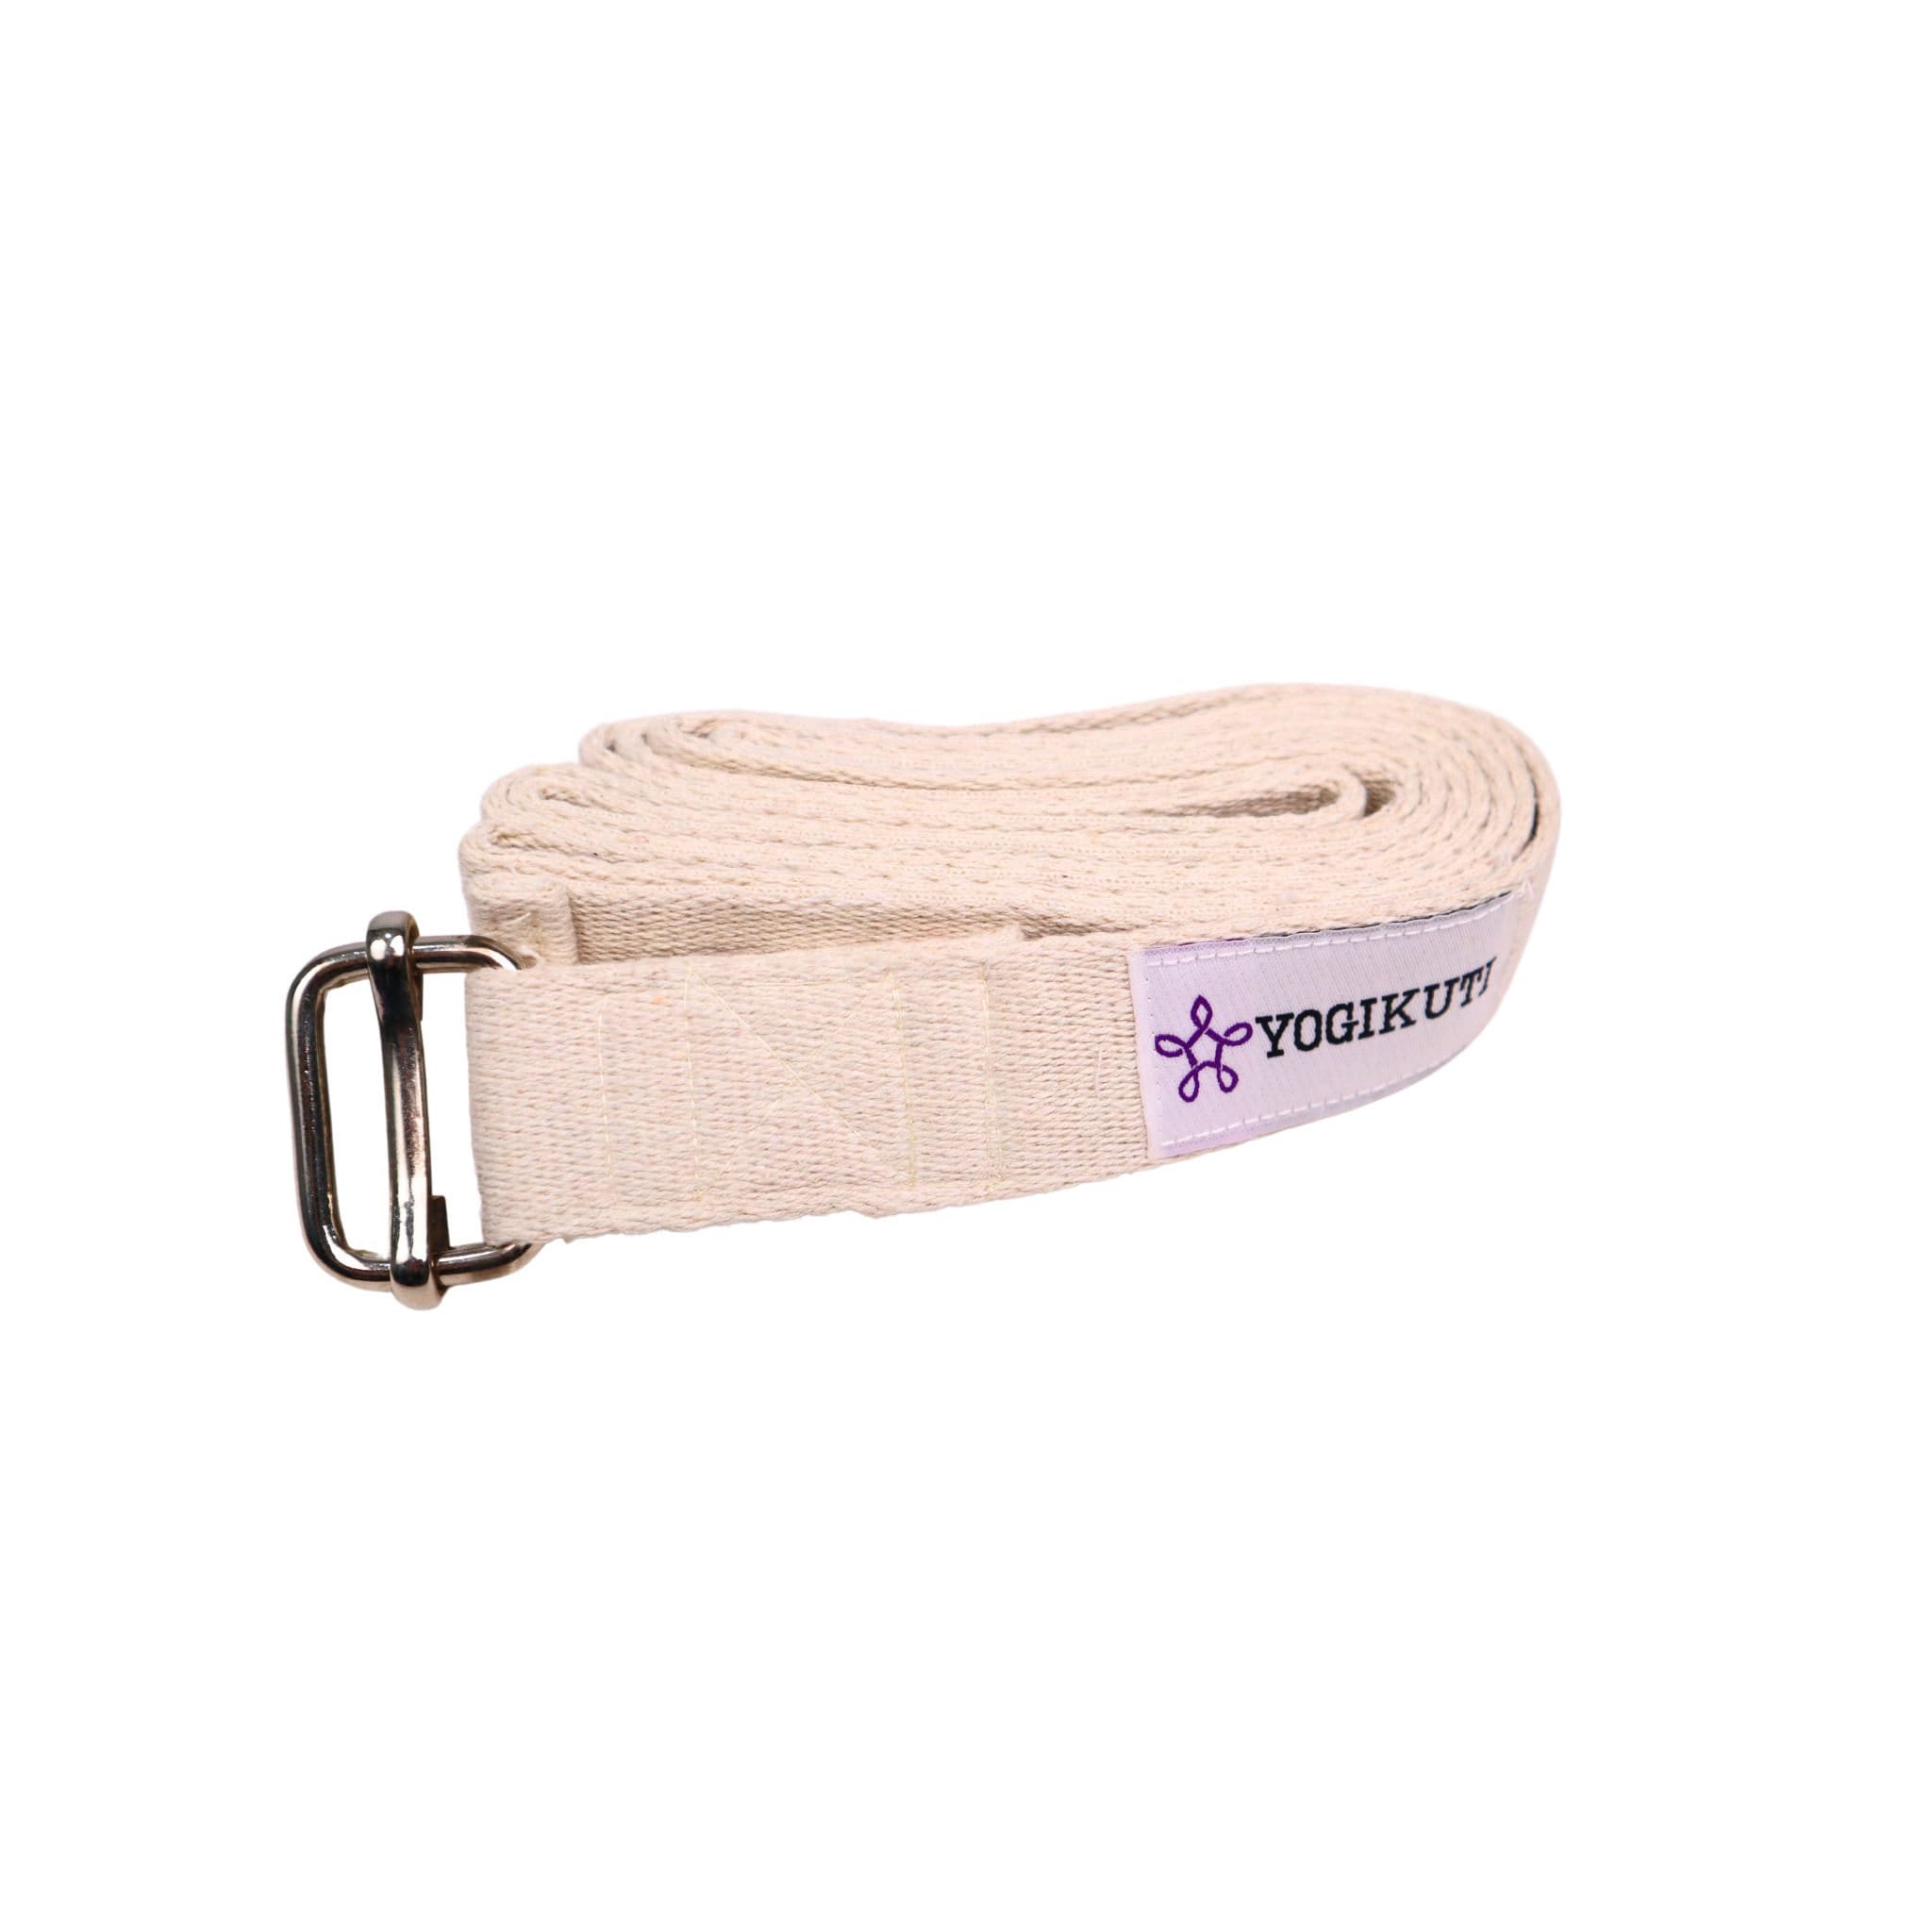 9 Feet Yoga Belt in Grey 100% Cotton with Metal Clasp. - Proyog